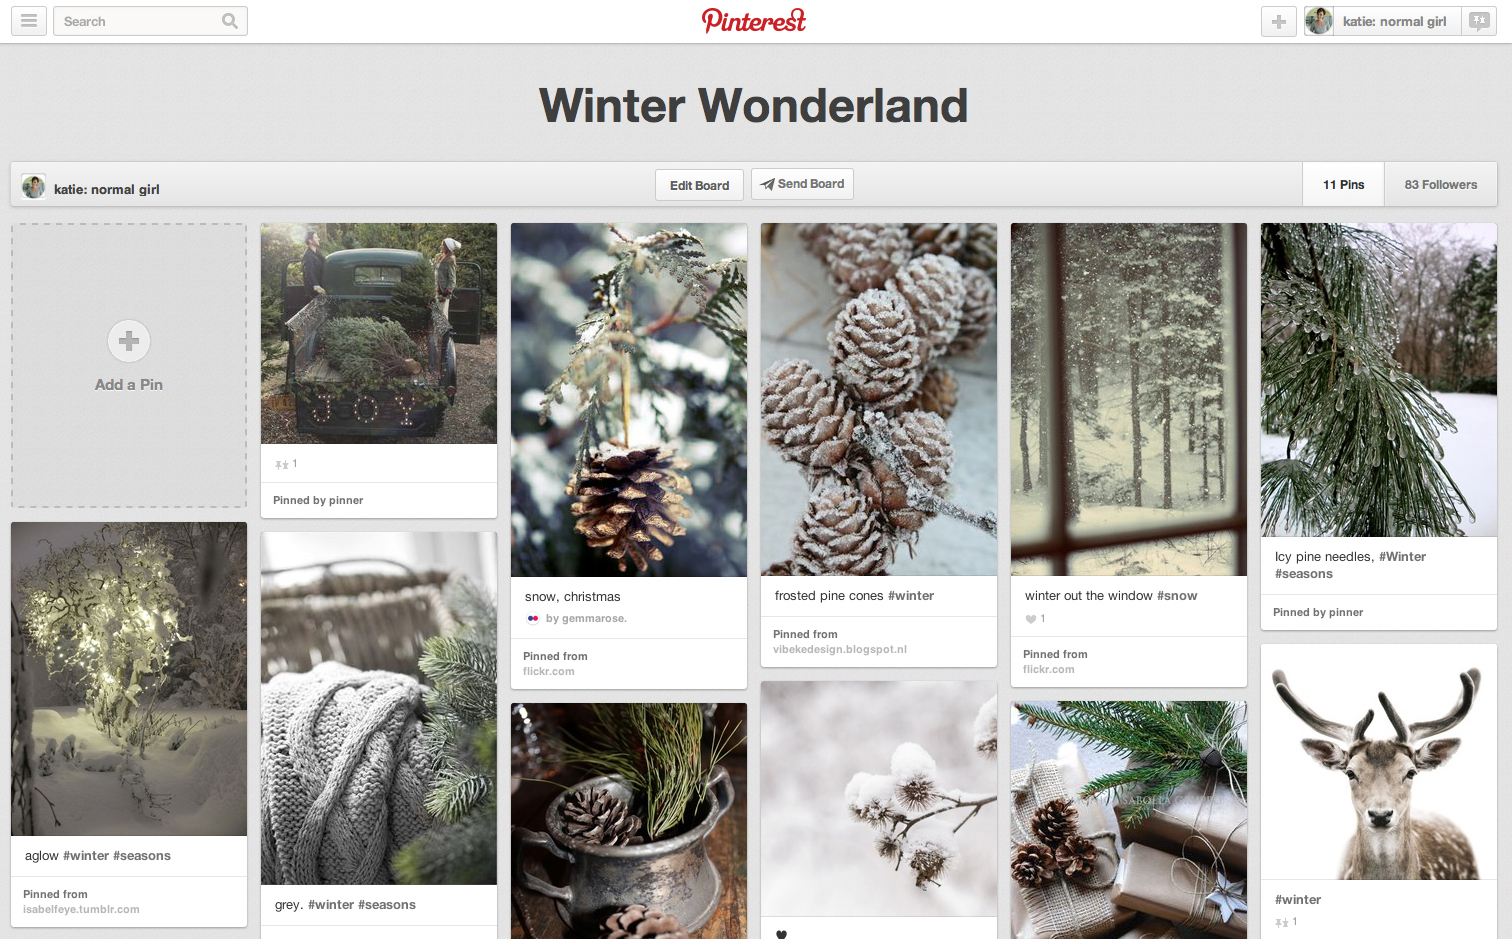 Winter Wonderland Pinterest board from katienormalgirl.com #winter #pictures #collection